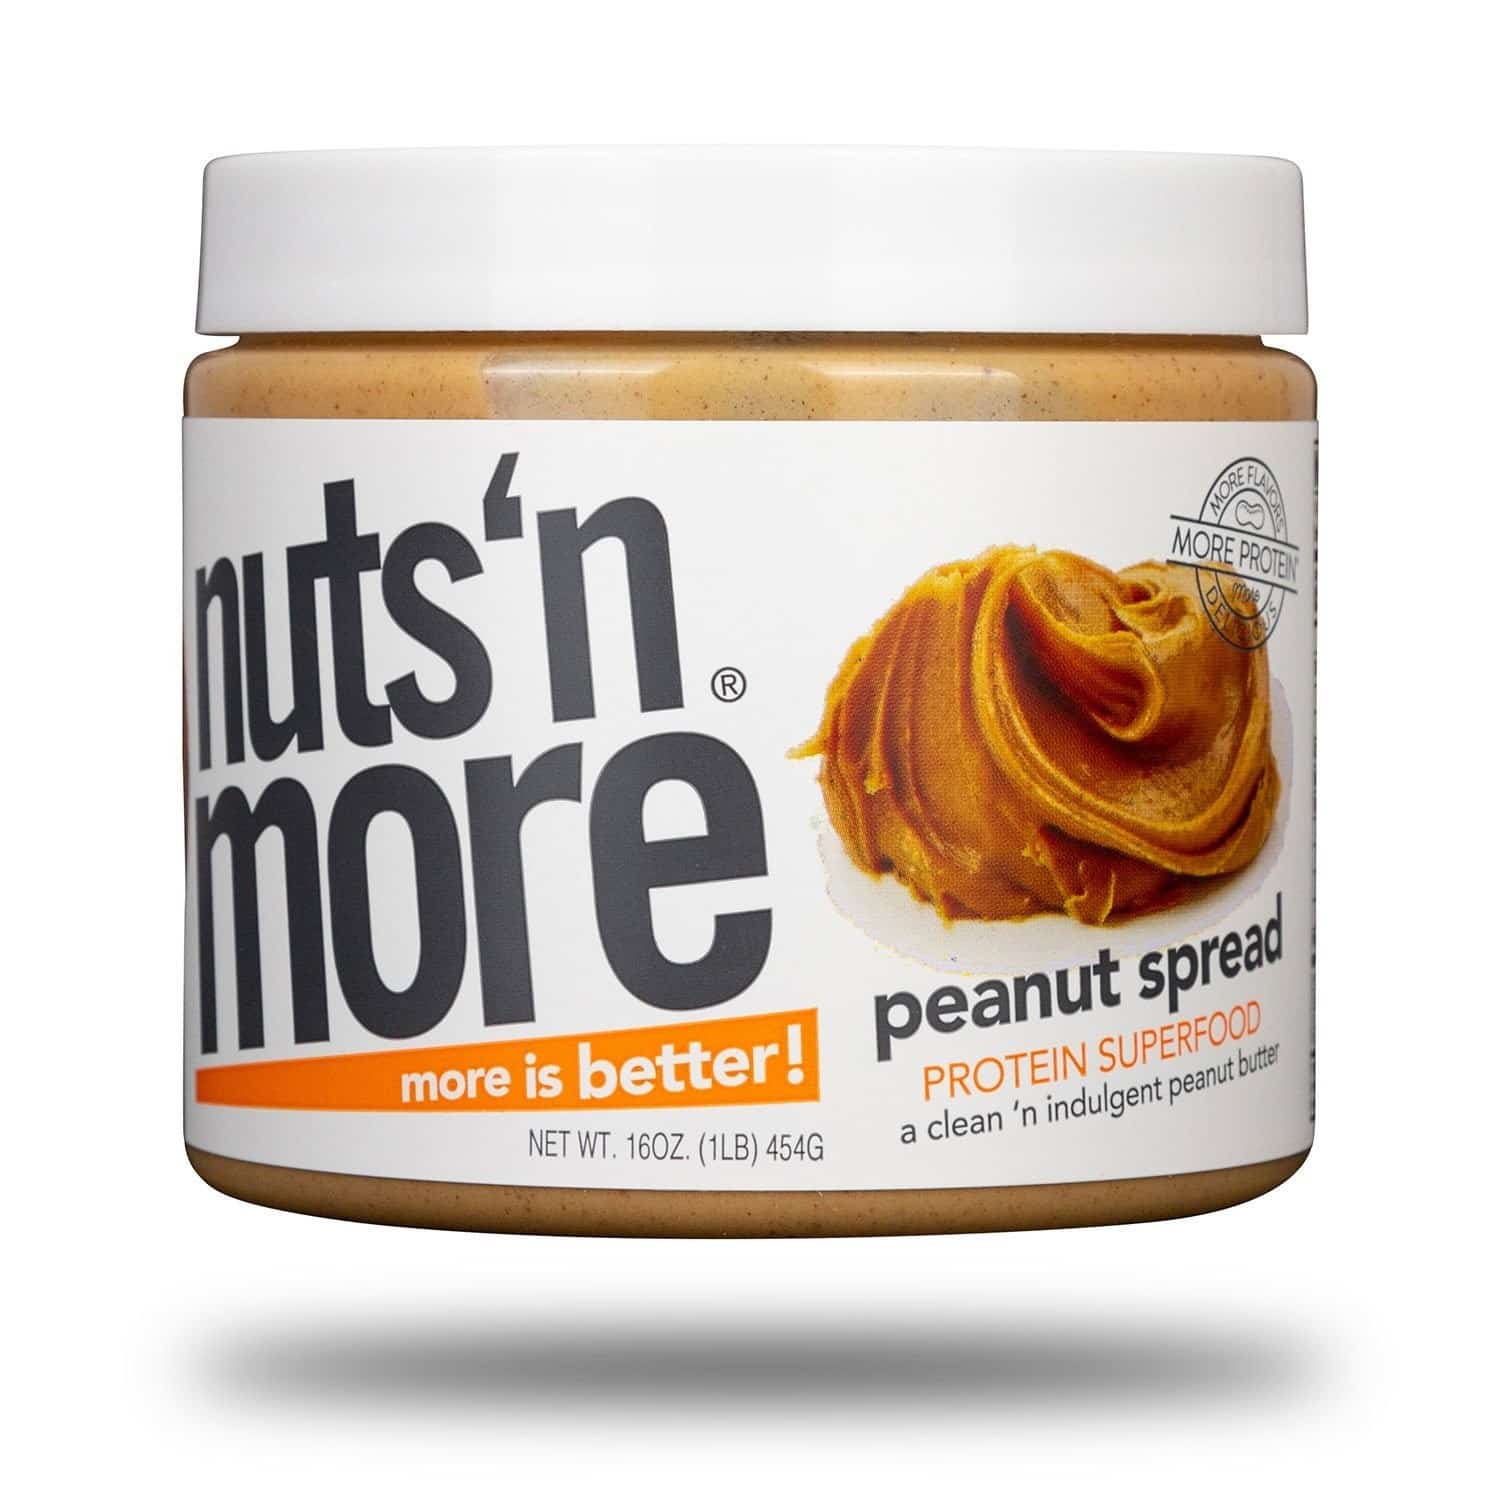 [CREDIT: RIDOH] Nuts n’ More LLC. of East Providence is recalling 4143 jars of Plain Peanut Spread due to possible Listeria contamination.